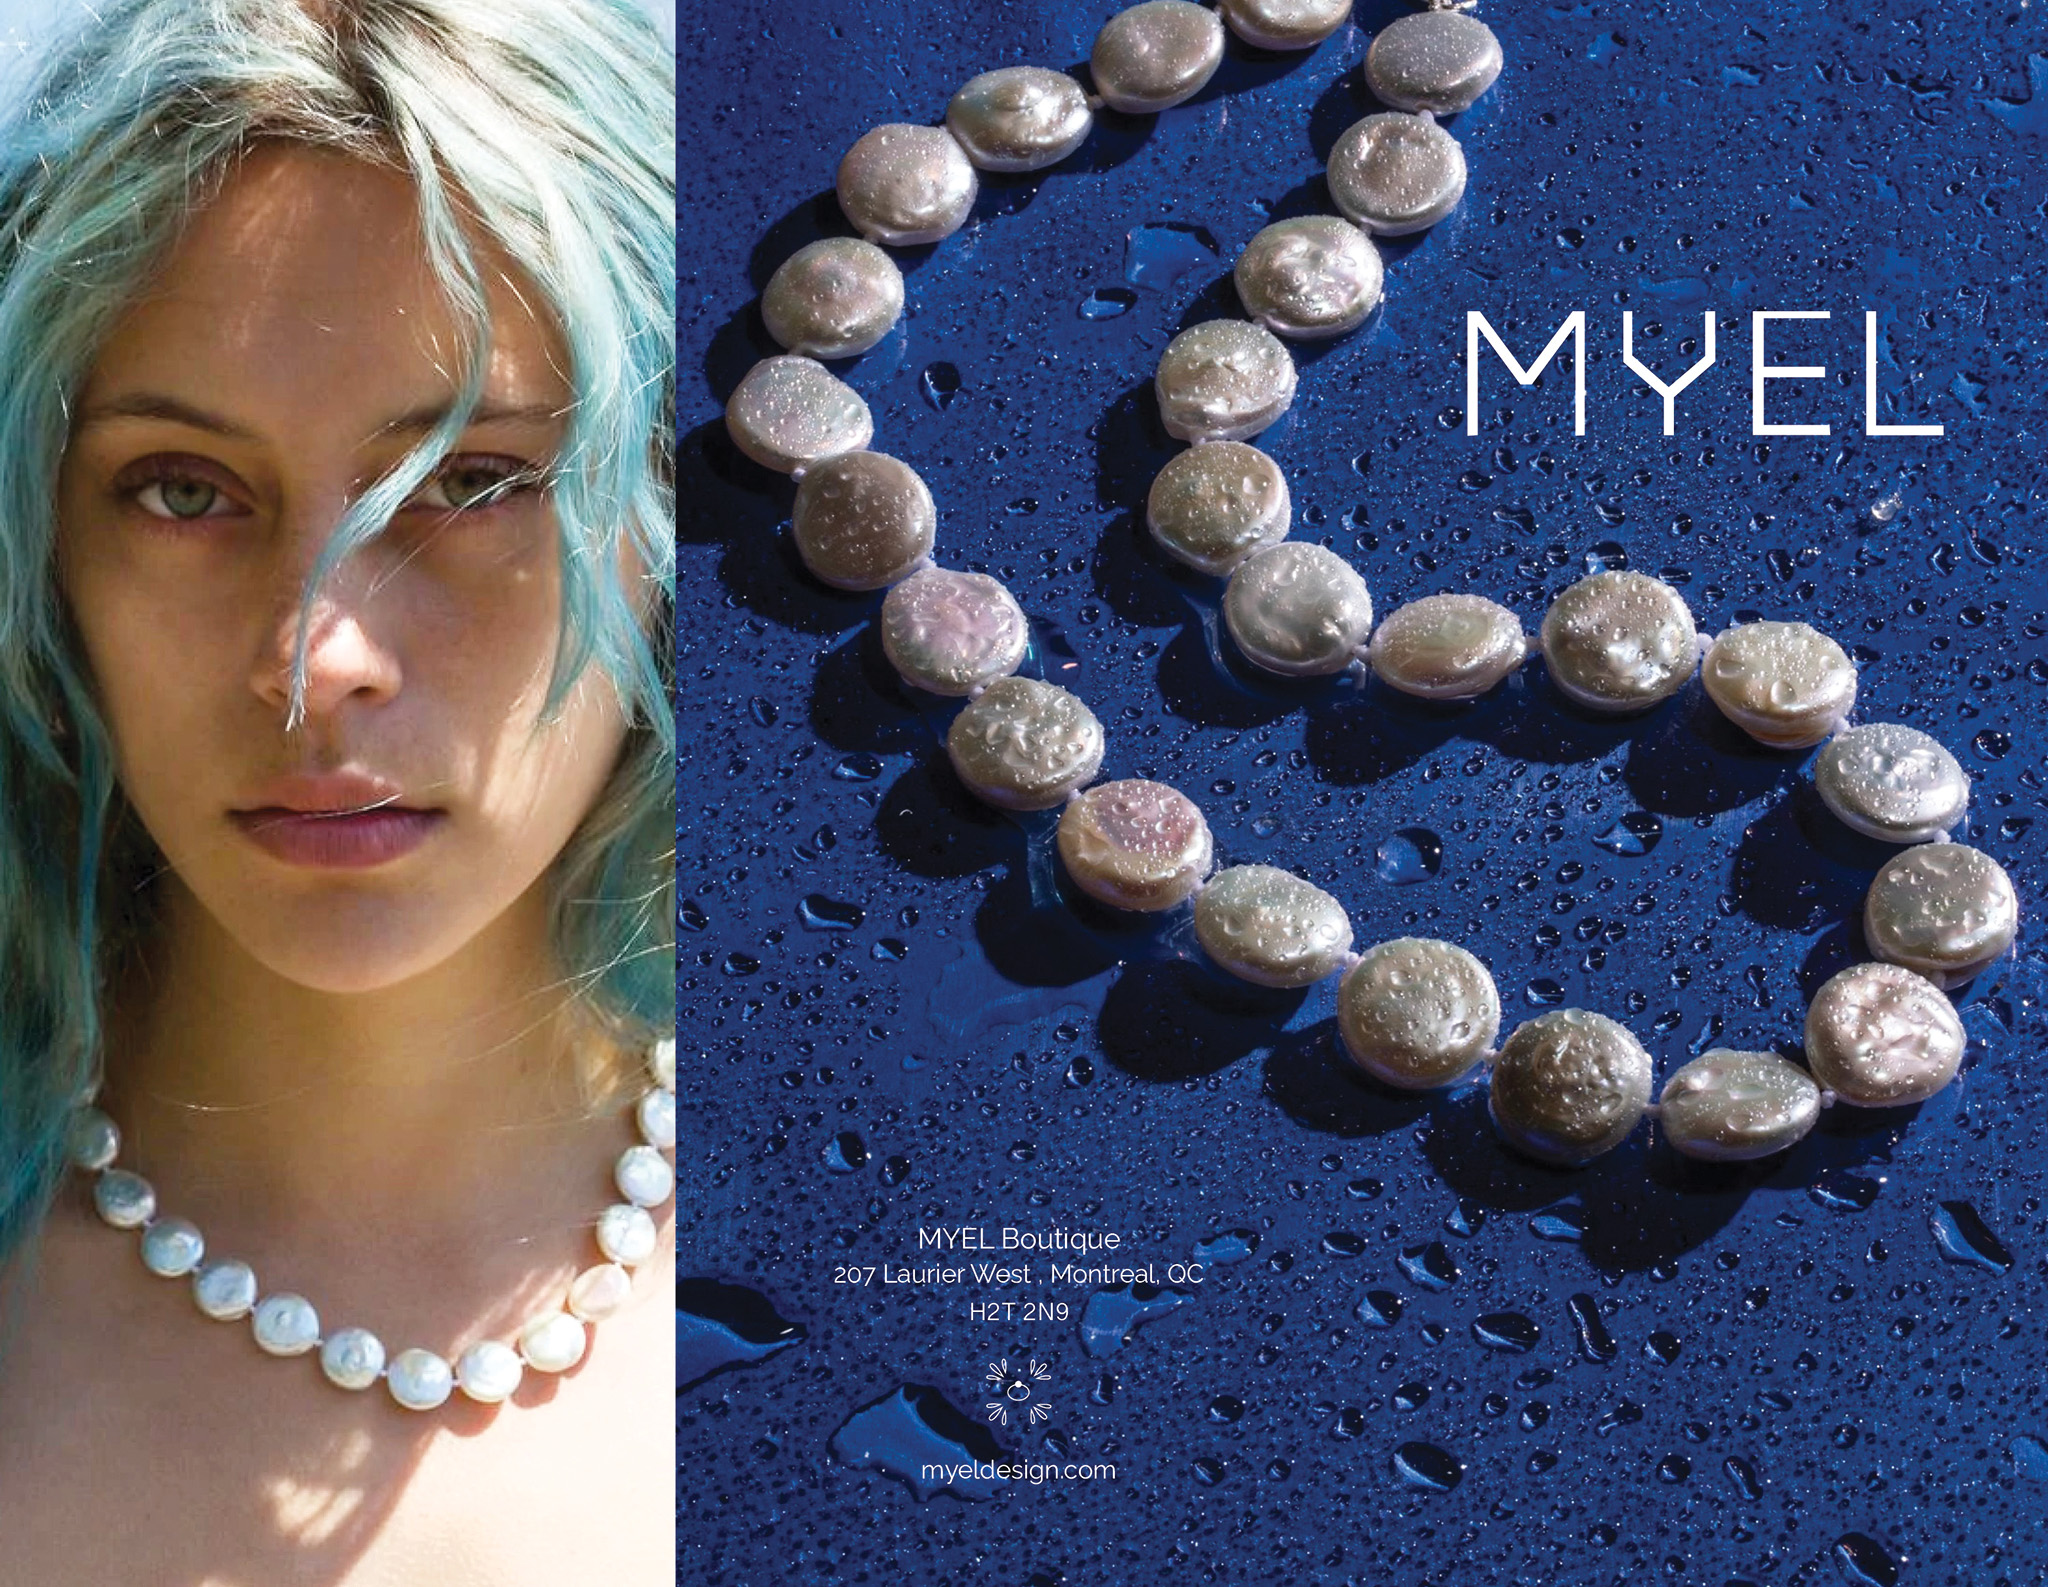 This image is the outside of the brochure completed in Graphic Design two based on the jewellery company MYEL. The back cover is a large image of a woman wearing the pearl necklace featured on the front cover.